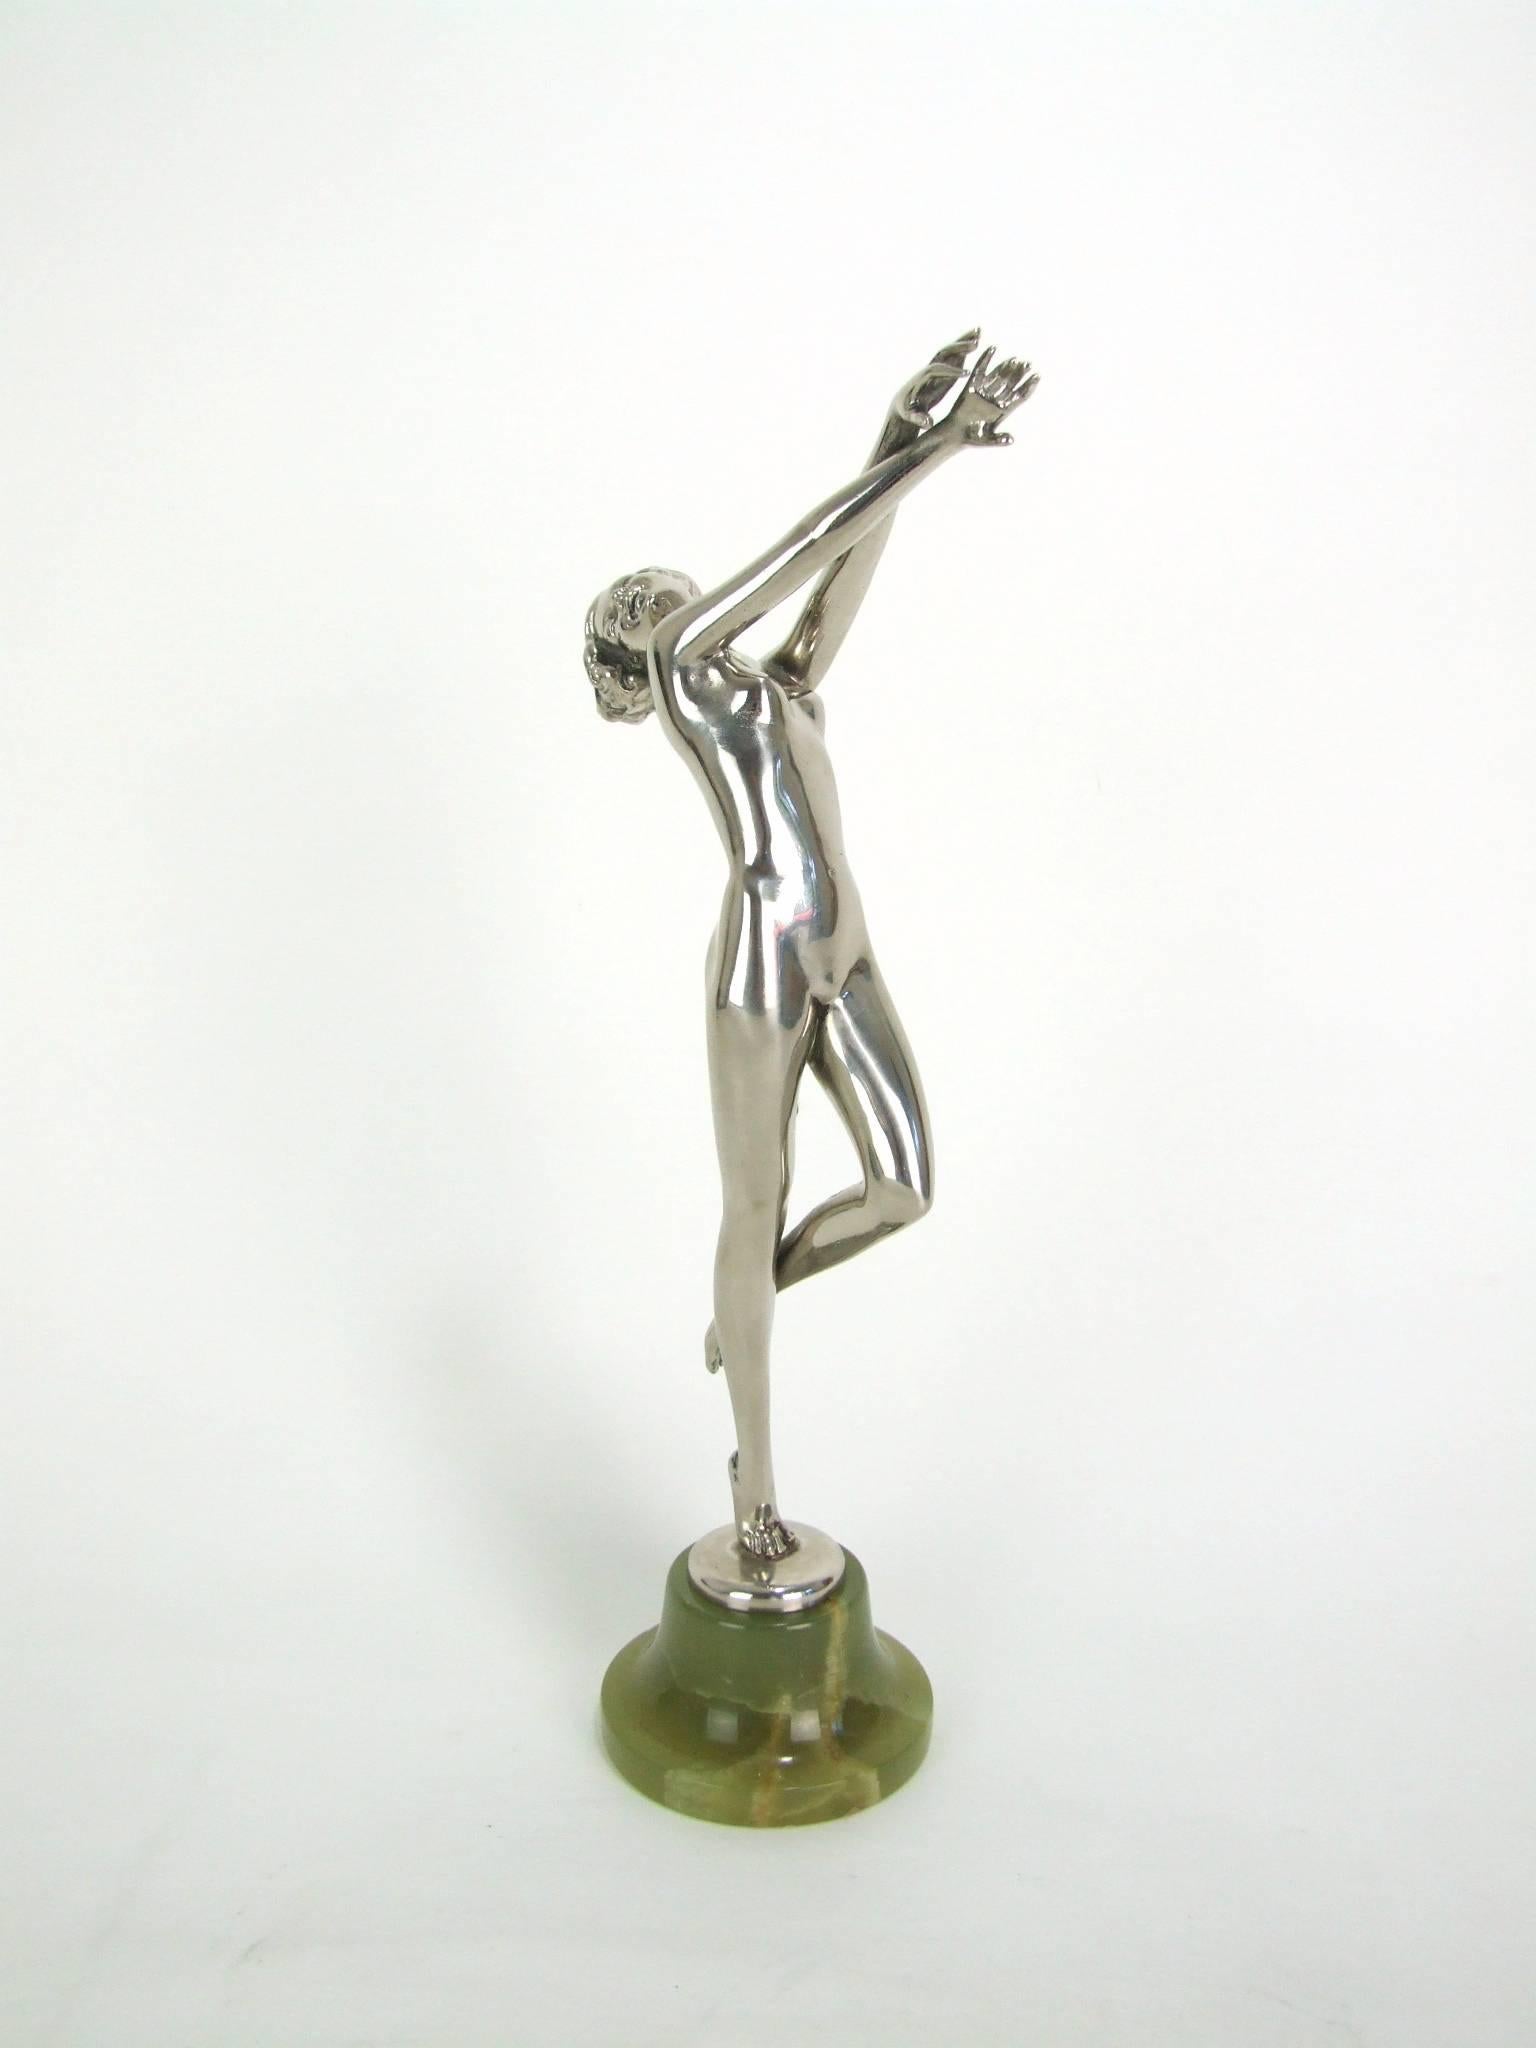 Austrian Art Deco silvered bronze dancer by Joseph Lorenzl. Mounted on an onyx base, she measures a total height of 12.5 inches (31.5cm). Condition is very good. Signed to the socle.
Email me for more pics and your personal shipping quote.